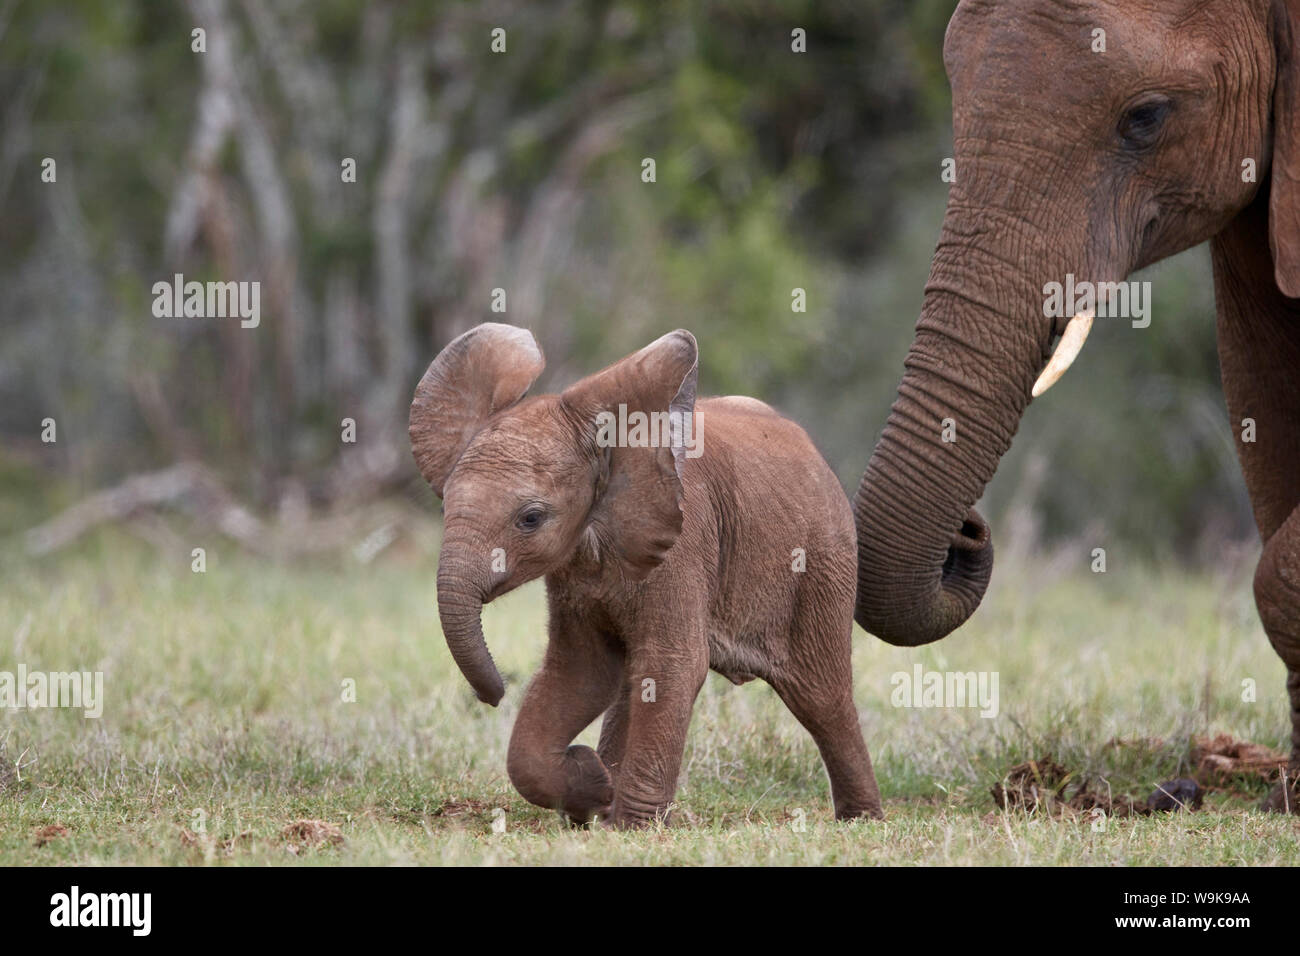 African Elephant (Loxodonta africana) baby and mother, Addo Elephant National Park, South Africa, Africa Stock Photo